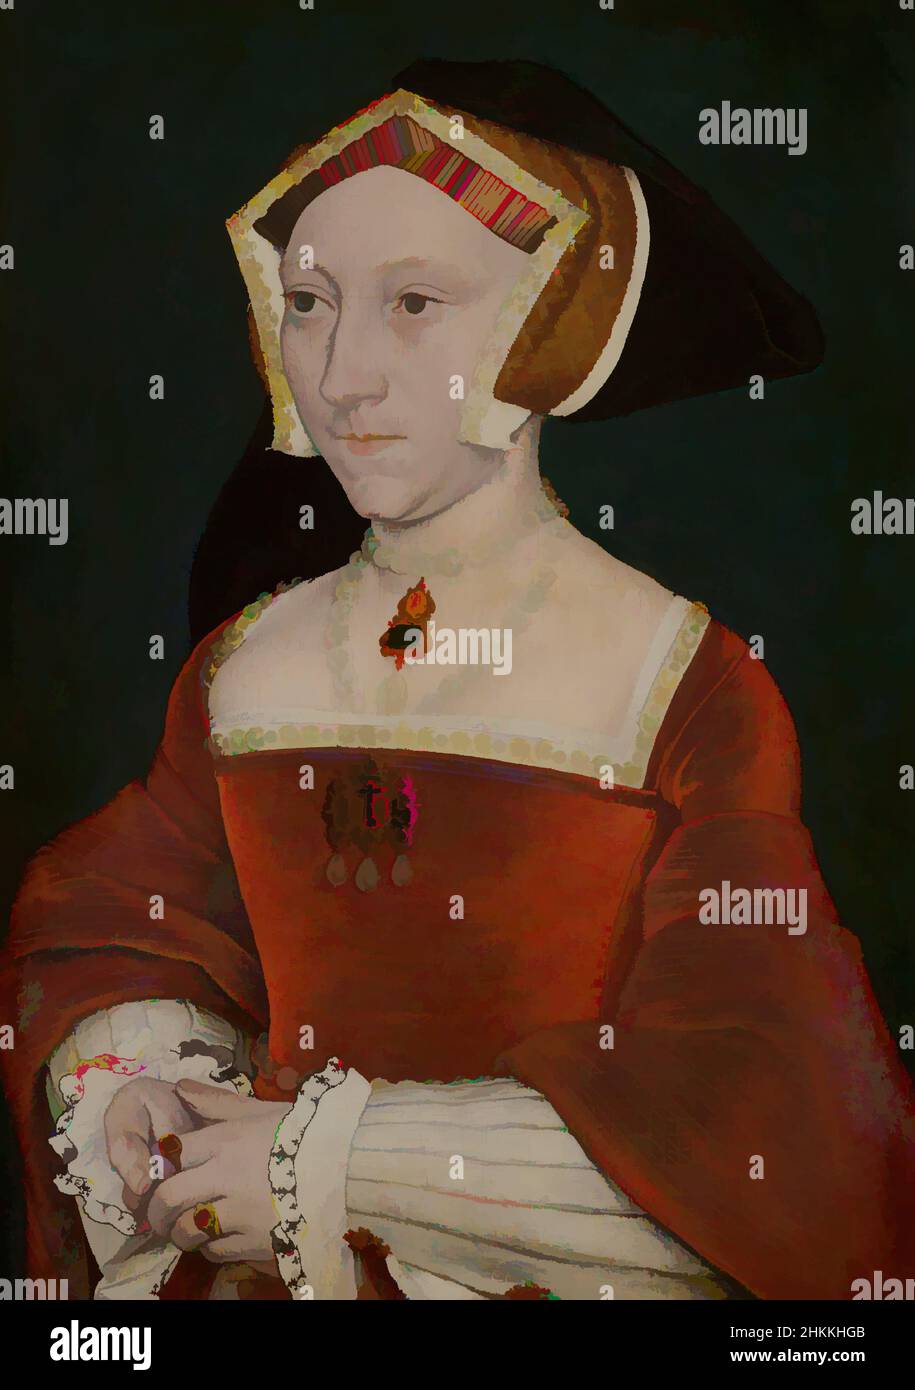 Art inspired by Portrait of Jane Seymour 1509? -1537, Hans Holbein de Jonge, workshop of, c. 1540, Classic works modernized by Artotop with a splash of modernity. Shapes, color and value, eye-catching visual impact on art. Emotions through freedom of artworks in a contemporary way. A timeless message pursuing a wildly creative new direction. Artists turning to the digital medium and creating the Artotop NFT Stock Photo